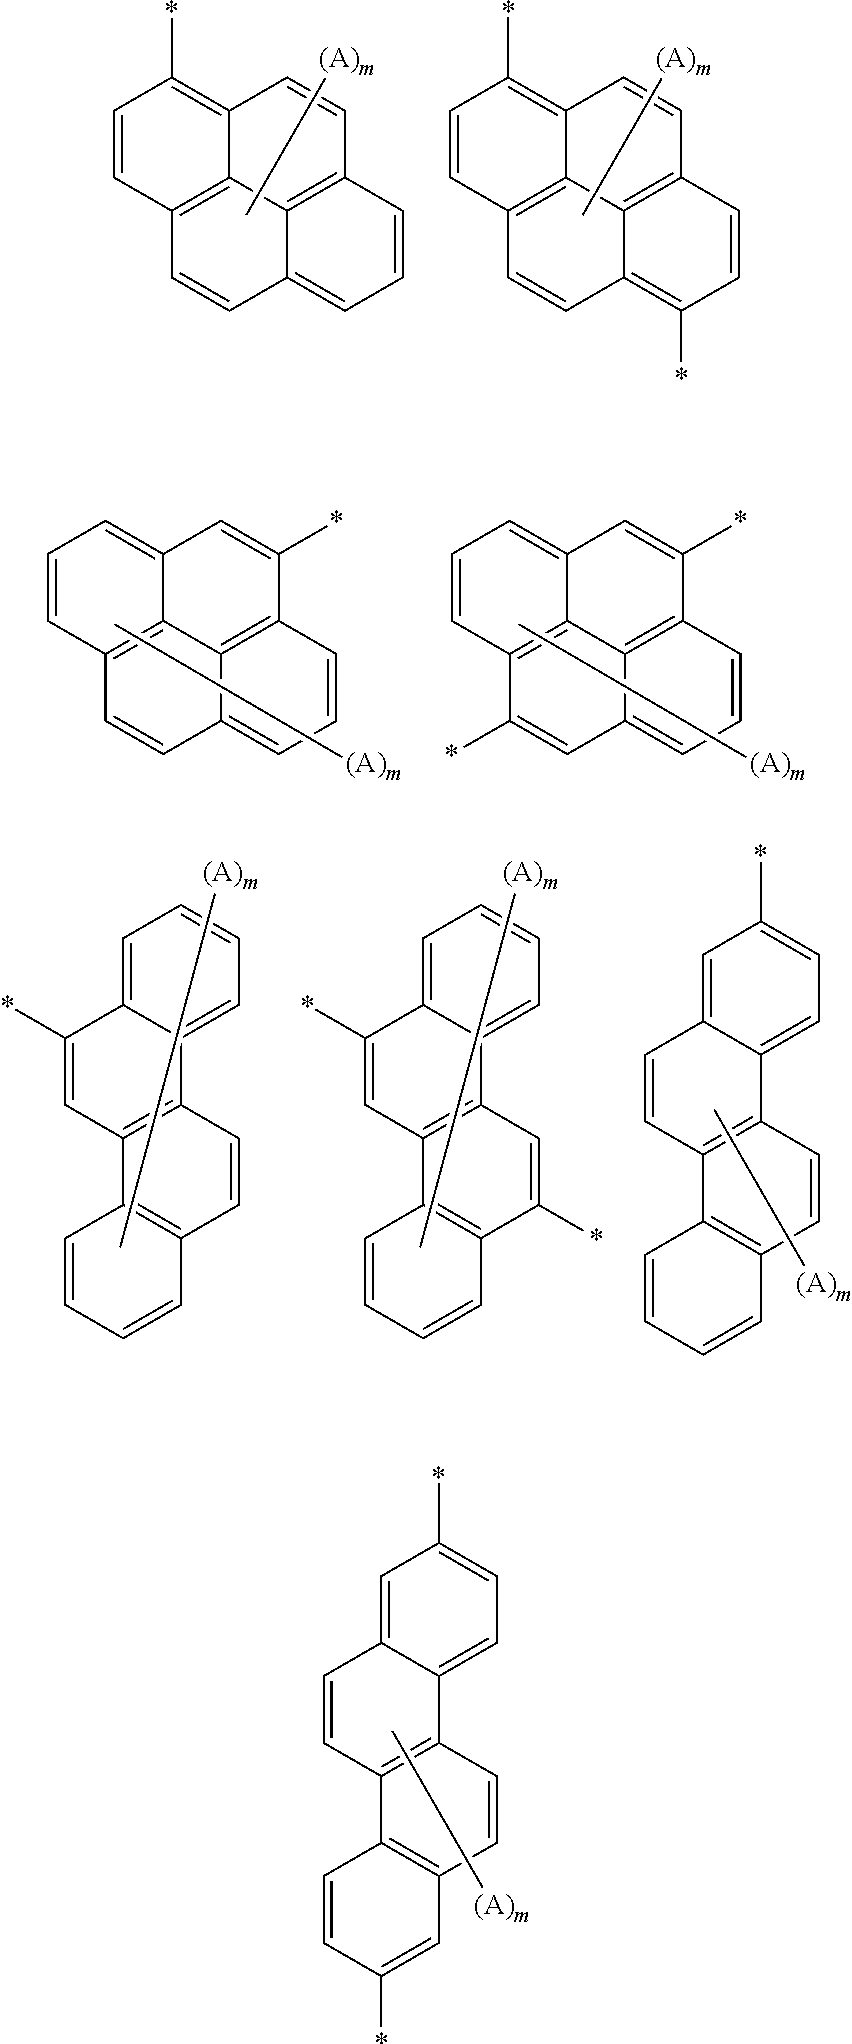 Organic electroluminescent device comprising the organic electroluminescent compounds